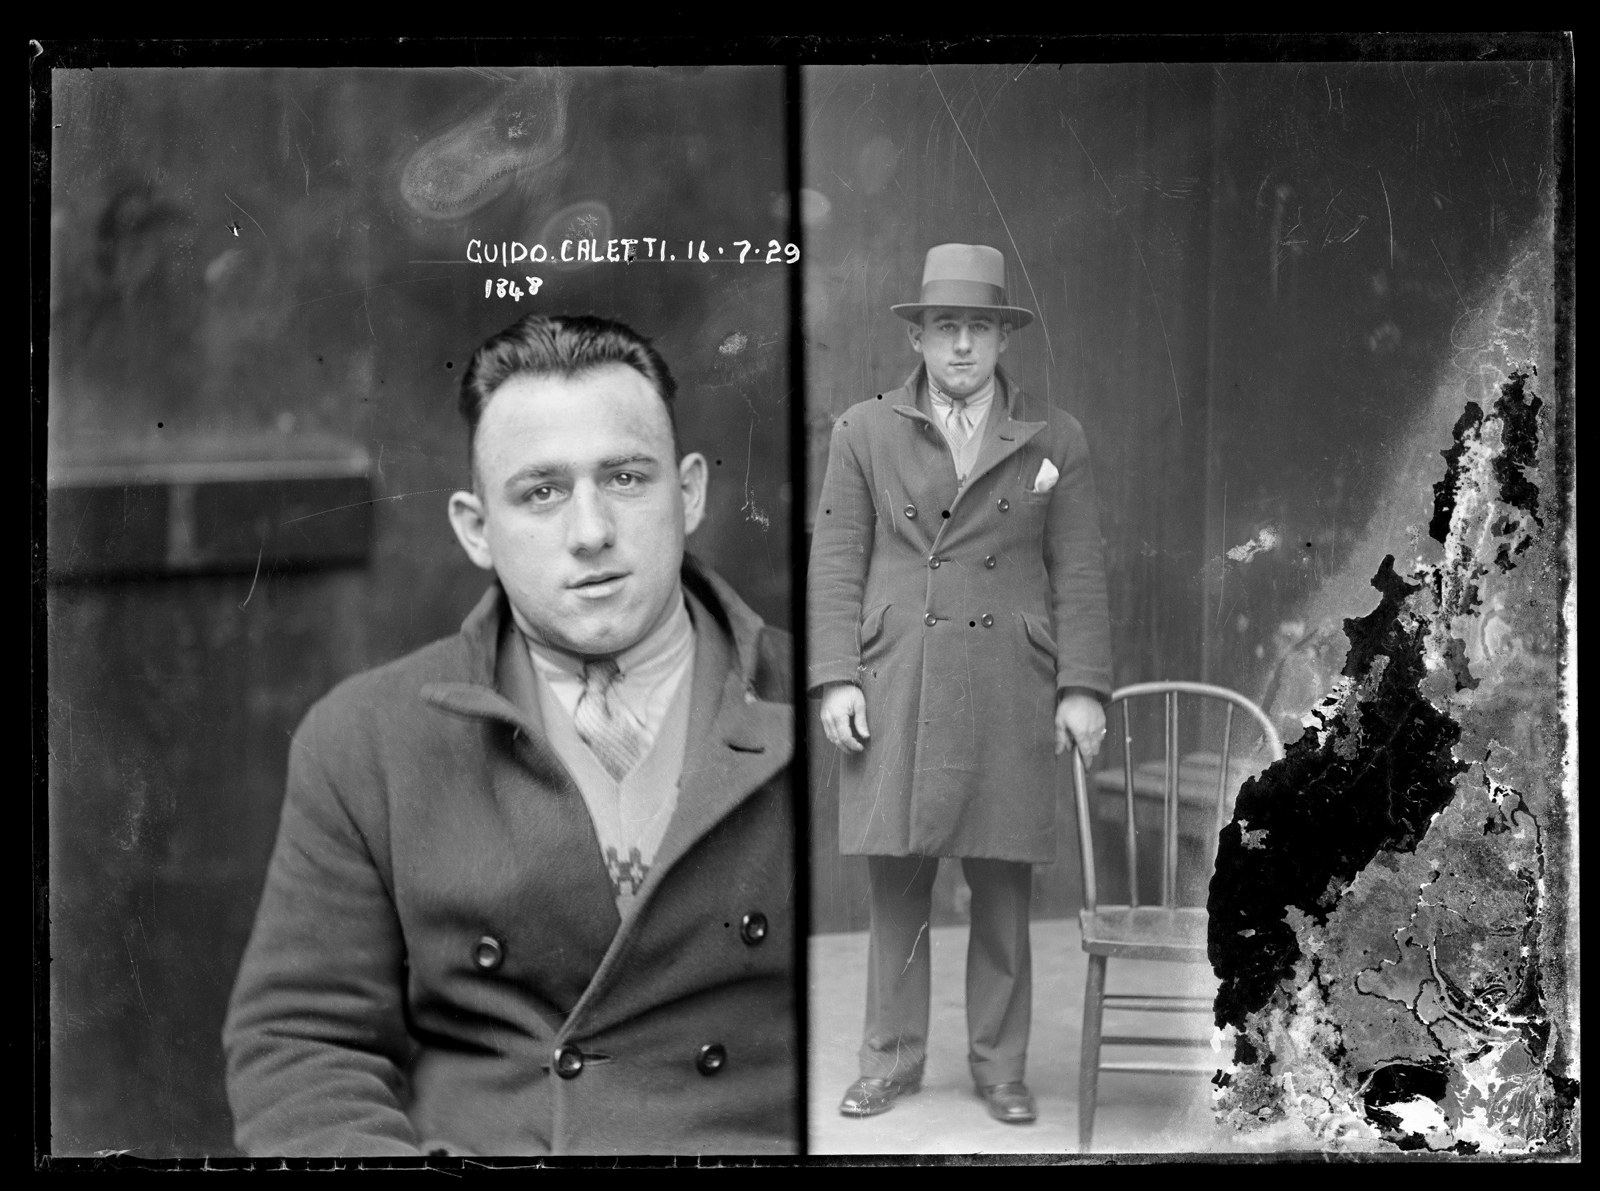 Guido Calletti, Special Photograph number 1848, 16 July 1929, Central Police Station, Sydney.